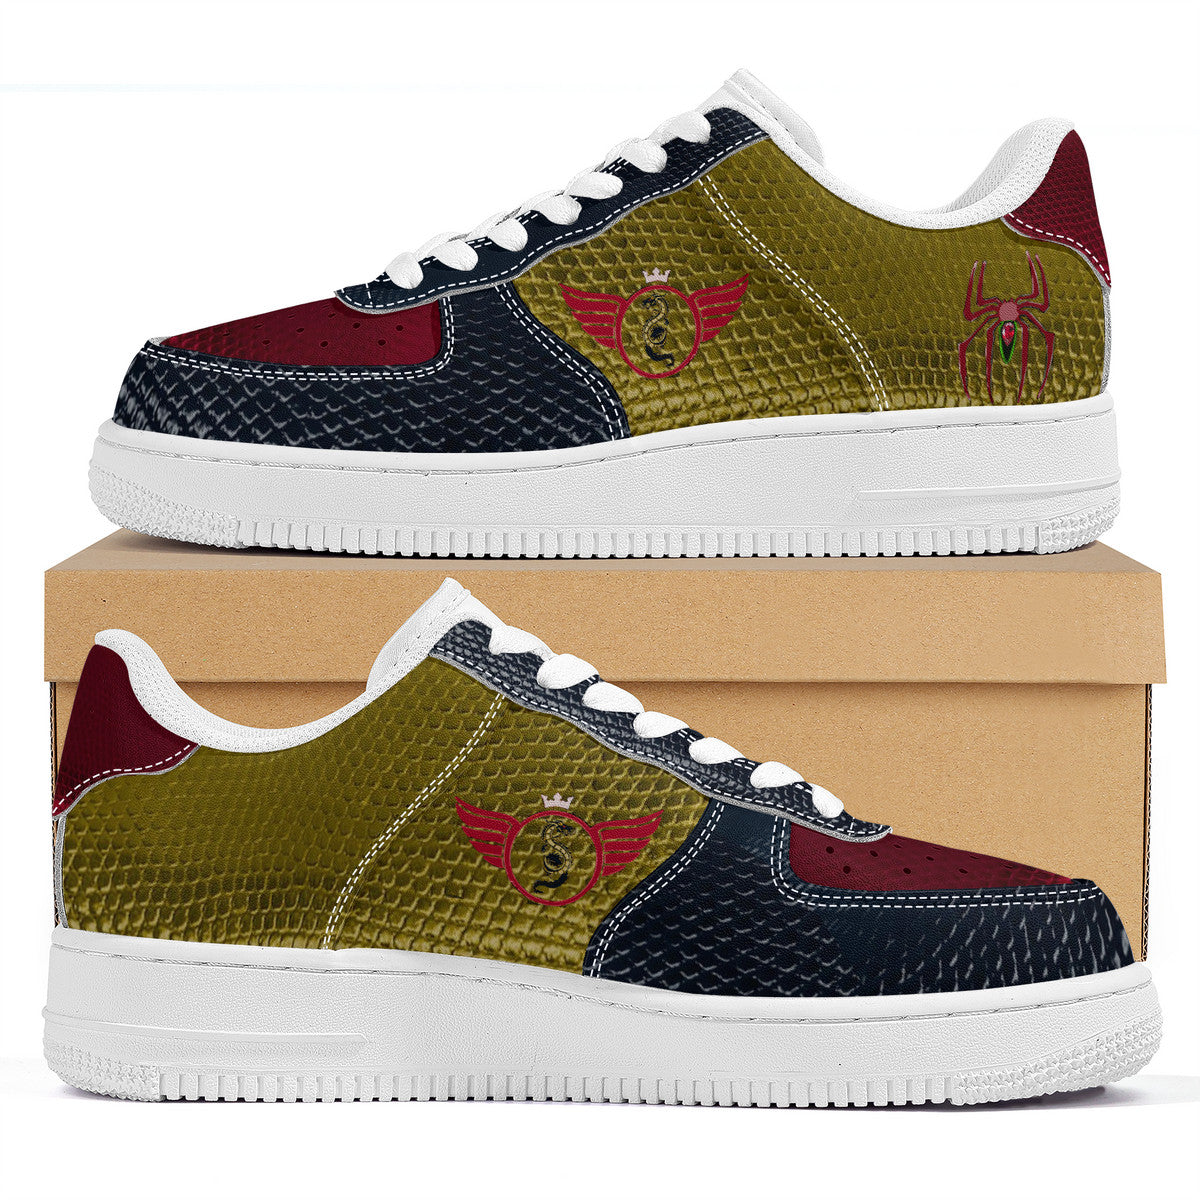 Majestic Gold, Red, Black Scales Print | Vision 1 Collection | Low Top Sneaker - Designed Shoe Drop - Shoe Zero